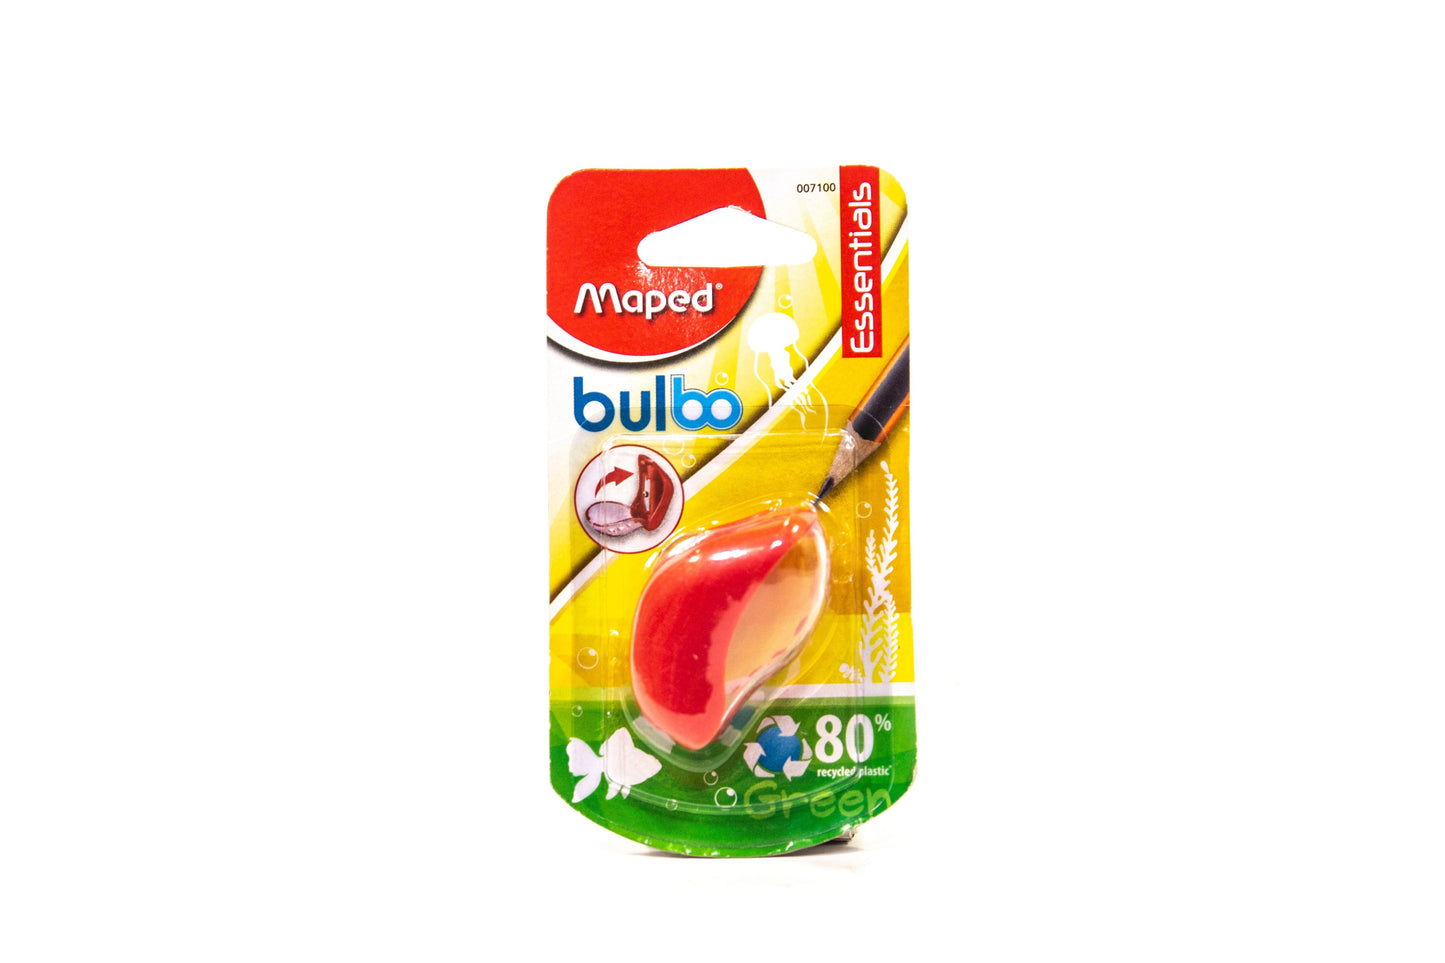 Maped Bulbo Sharpener 1-Hole 007100 | Sold by 5s